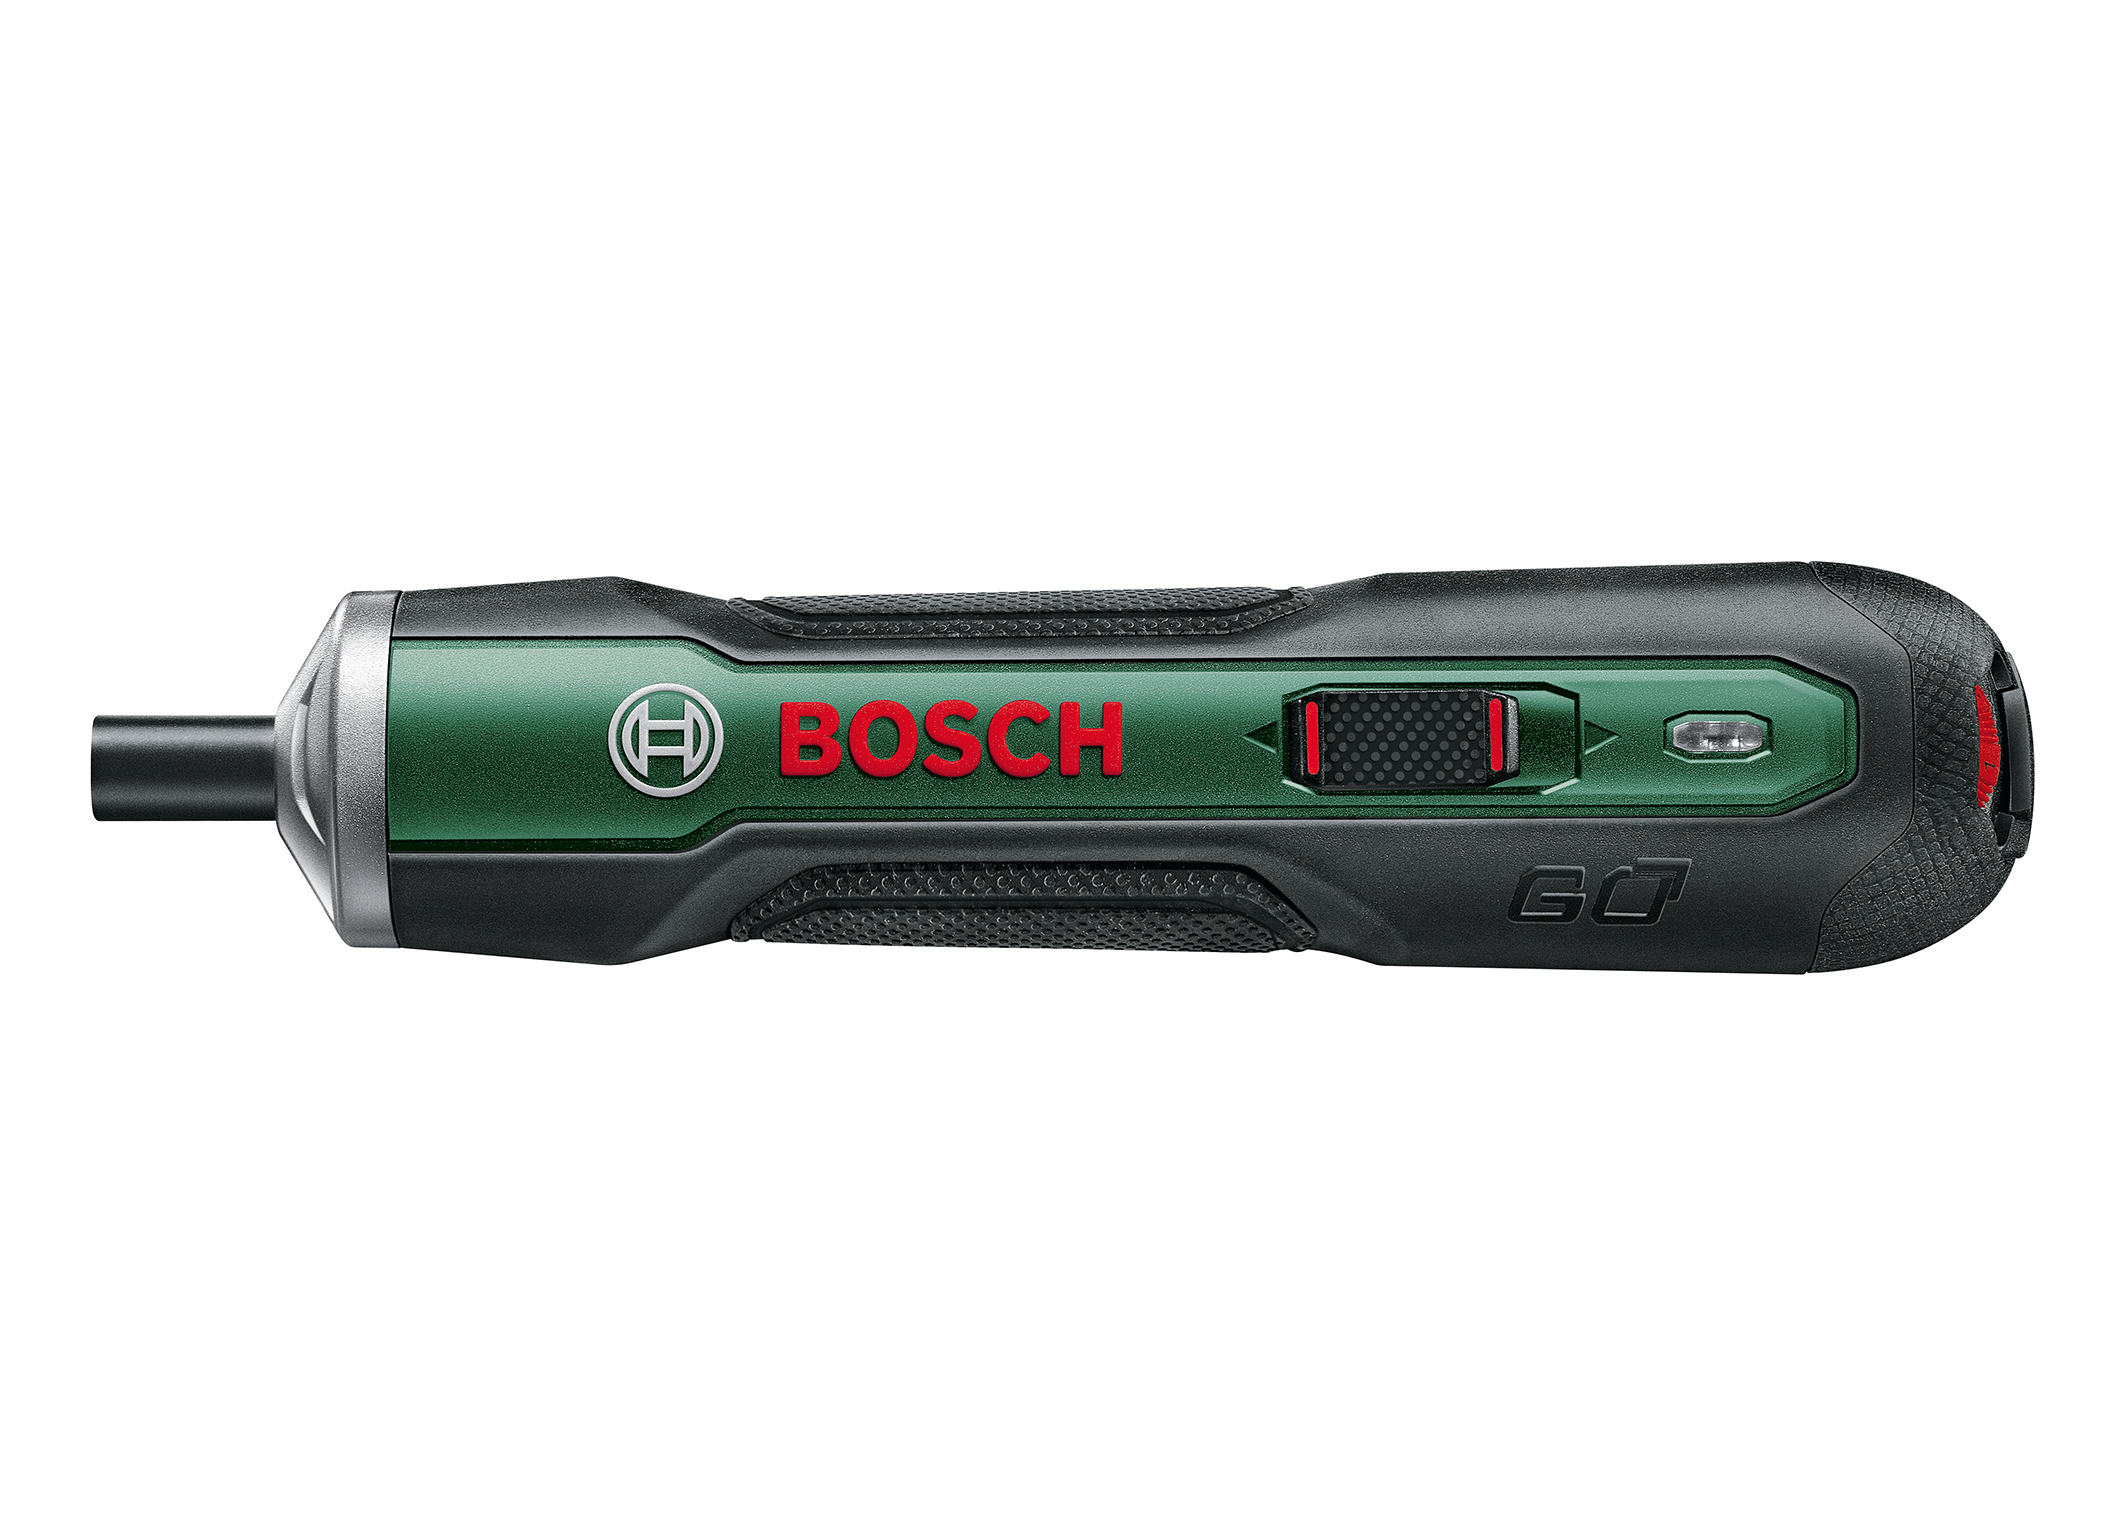 Compact cordless screwdriver for the trouser pocket: Bosch PushDrive with Push&Go function 